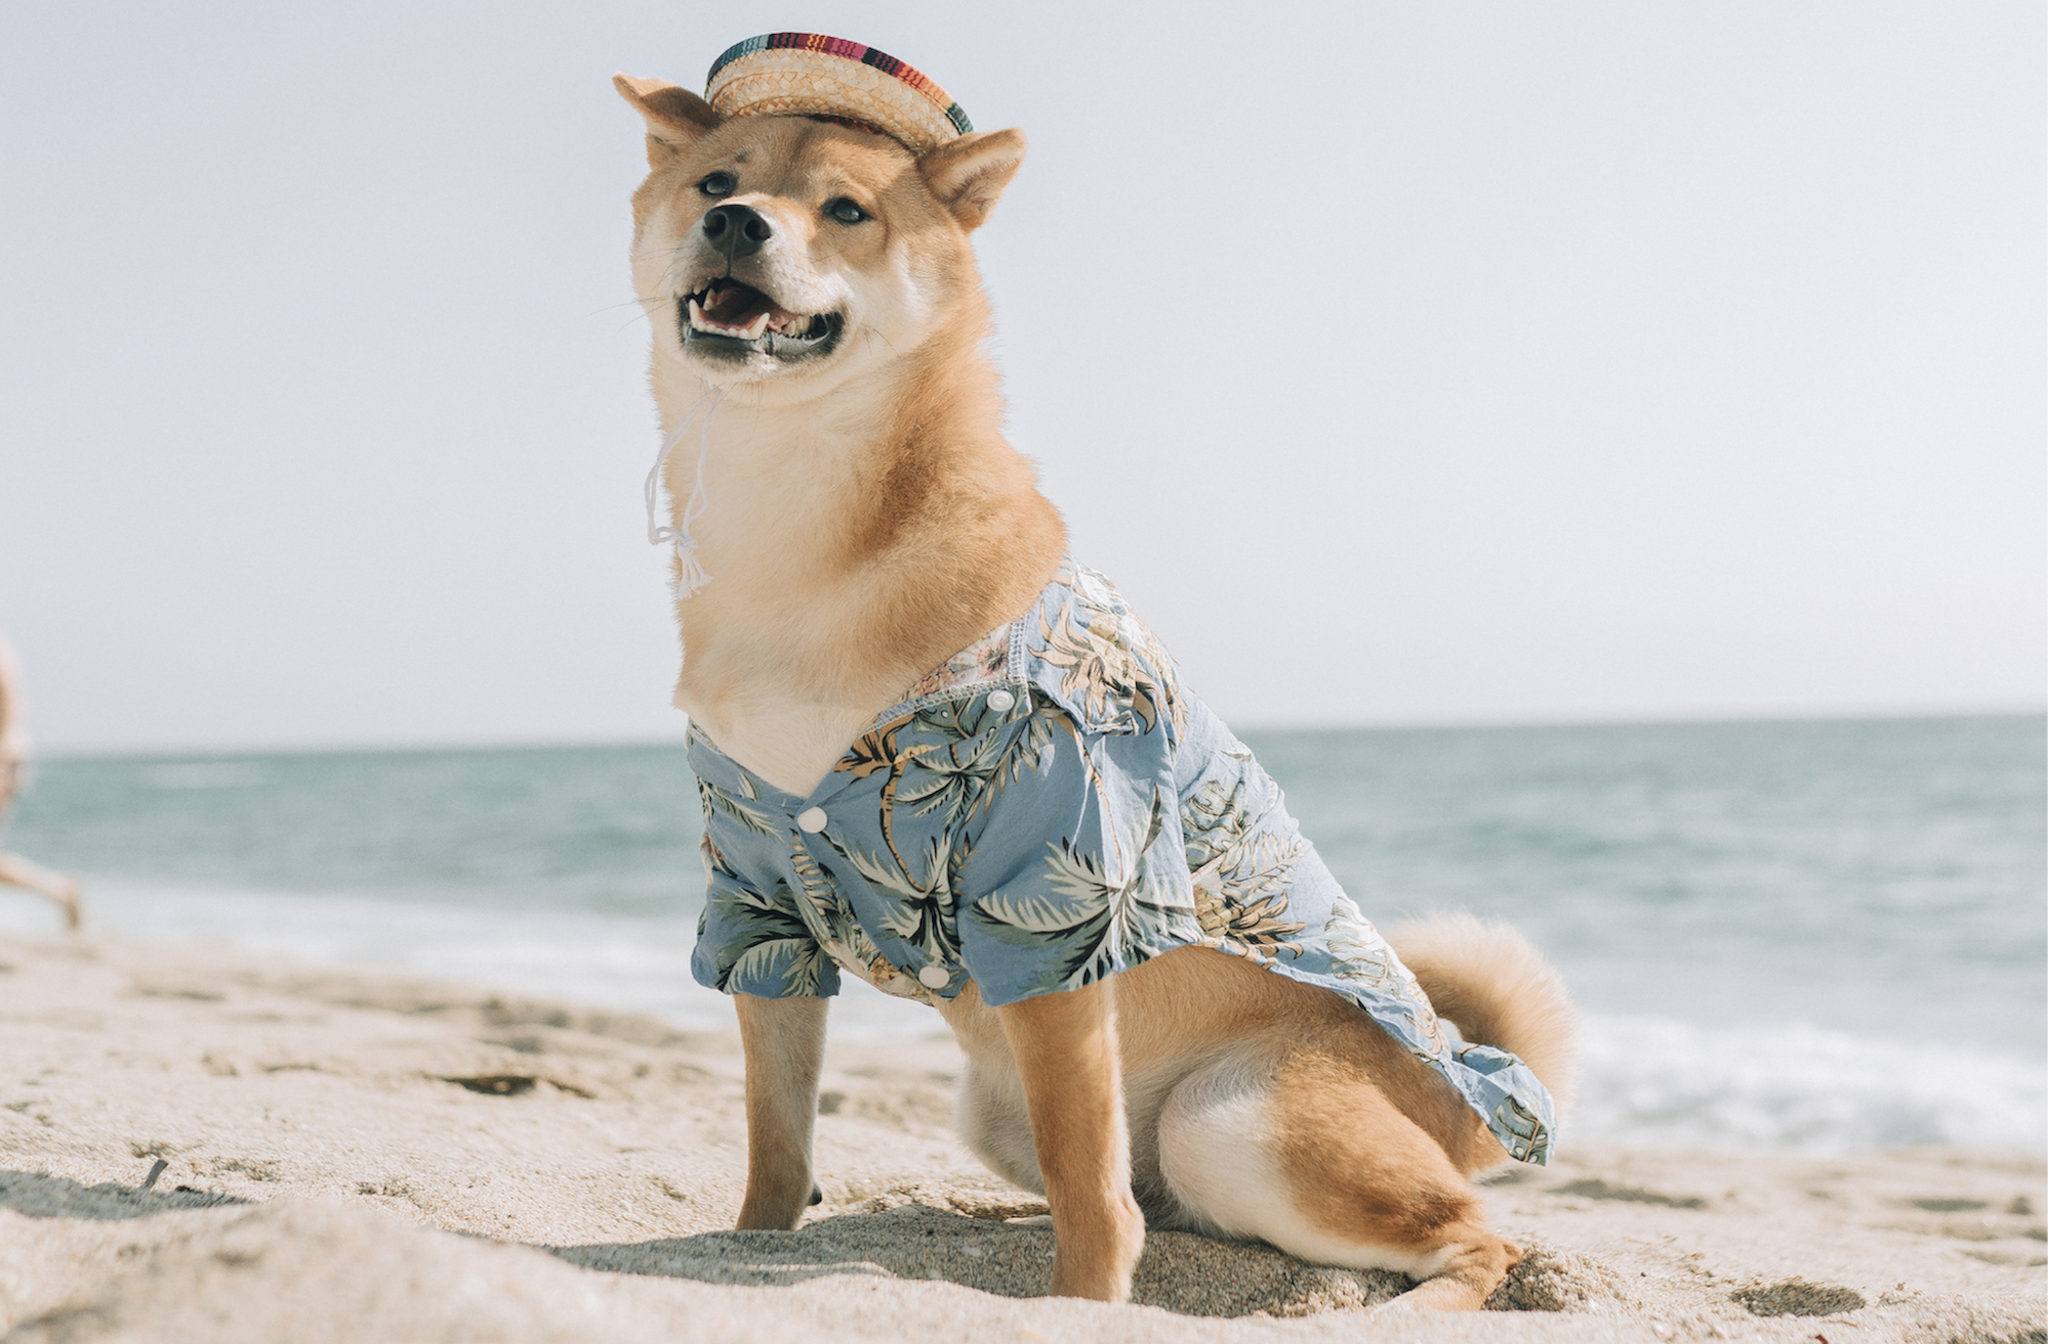 Keep Your Pet Cool & Comfy During the Dog Days of Summer